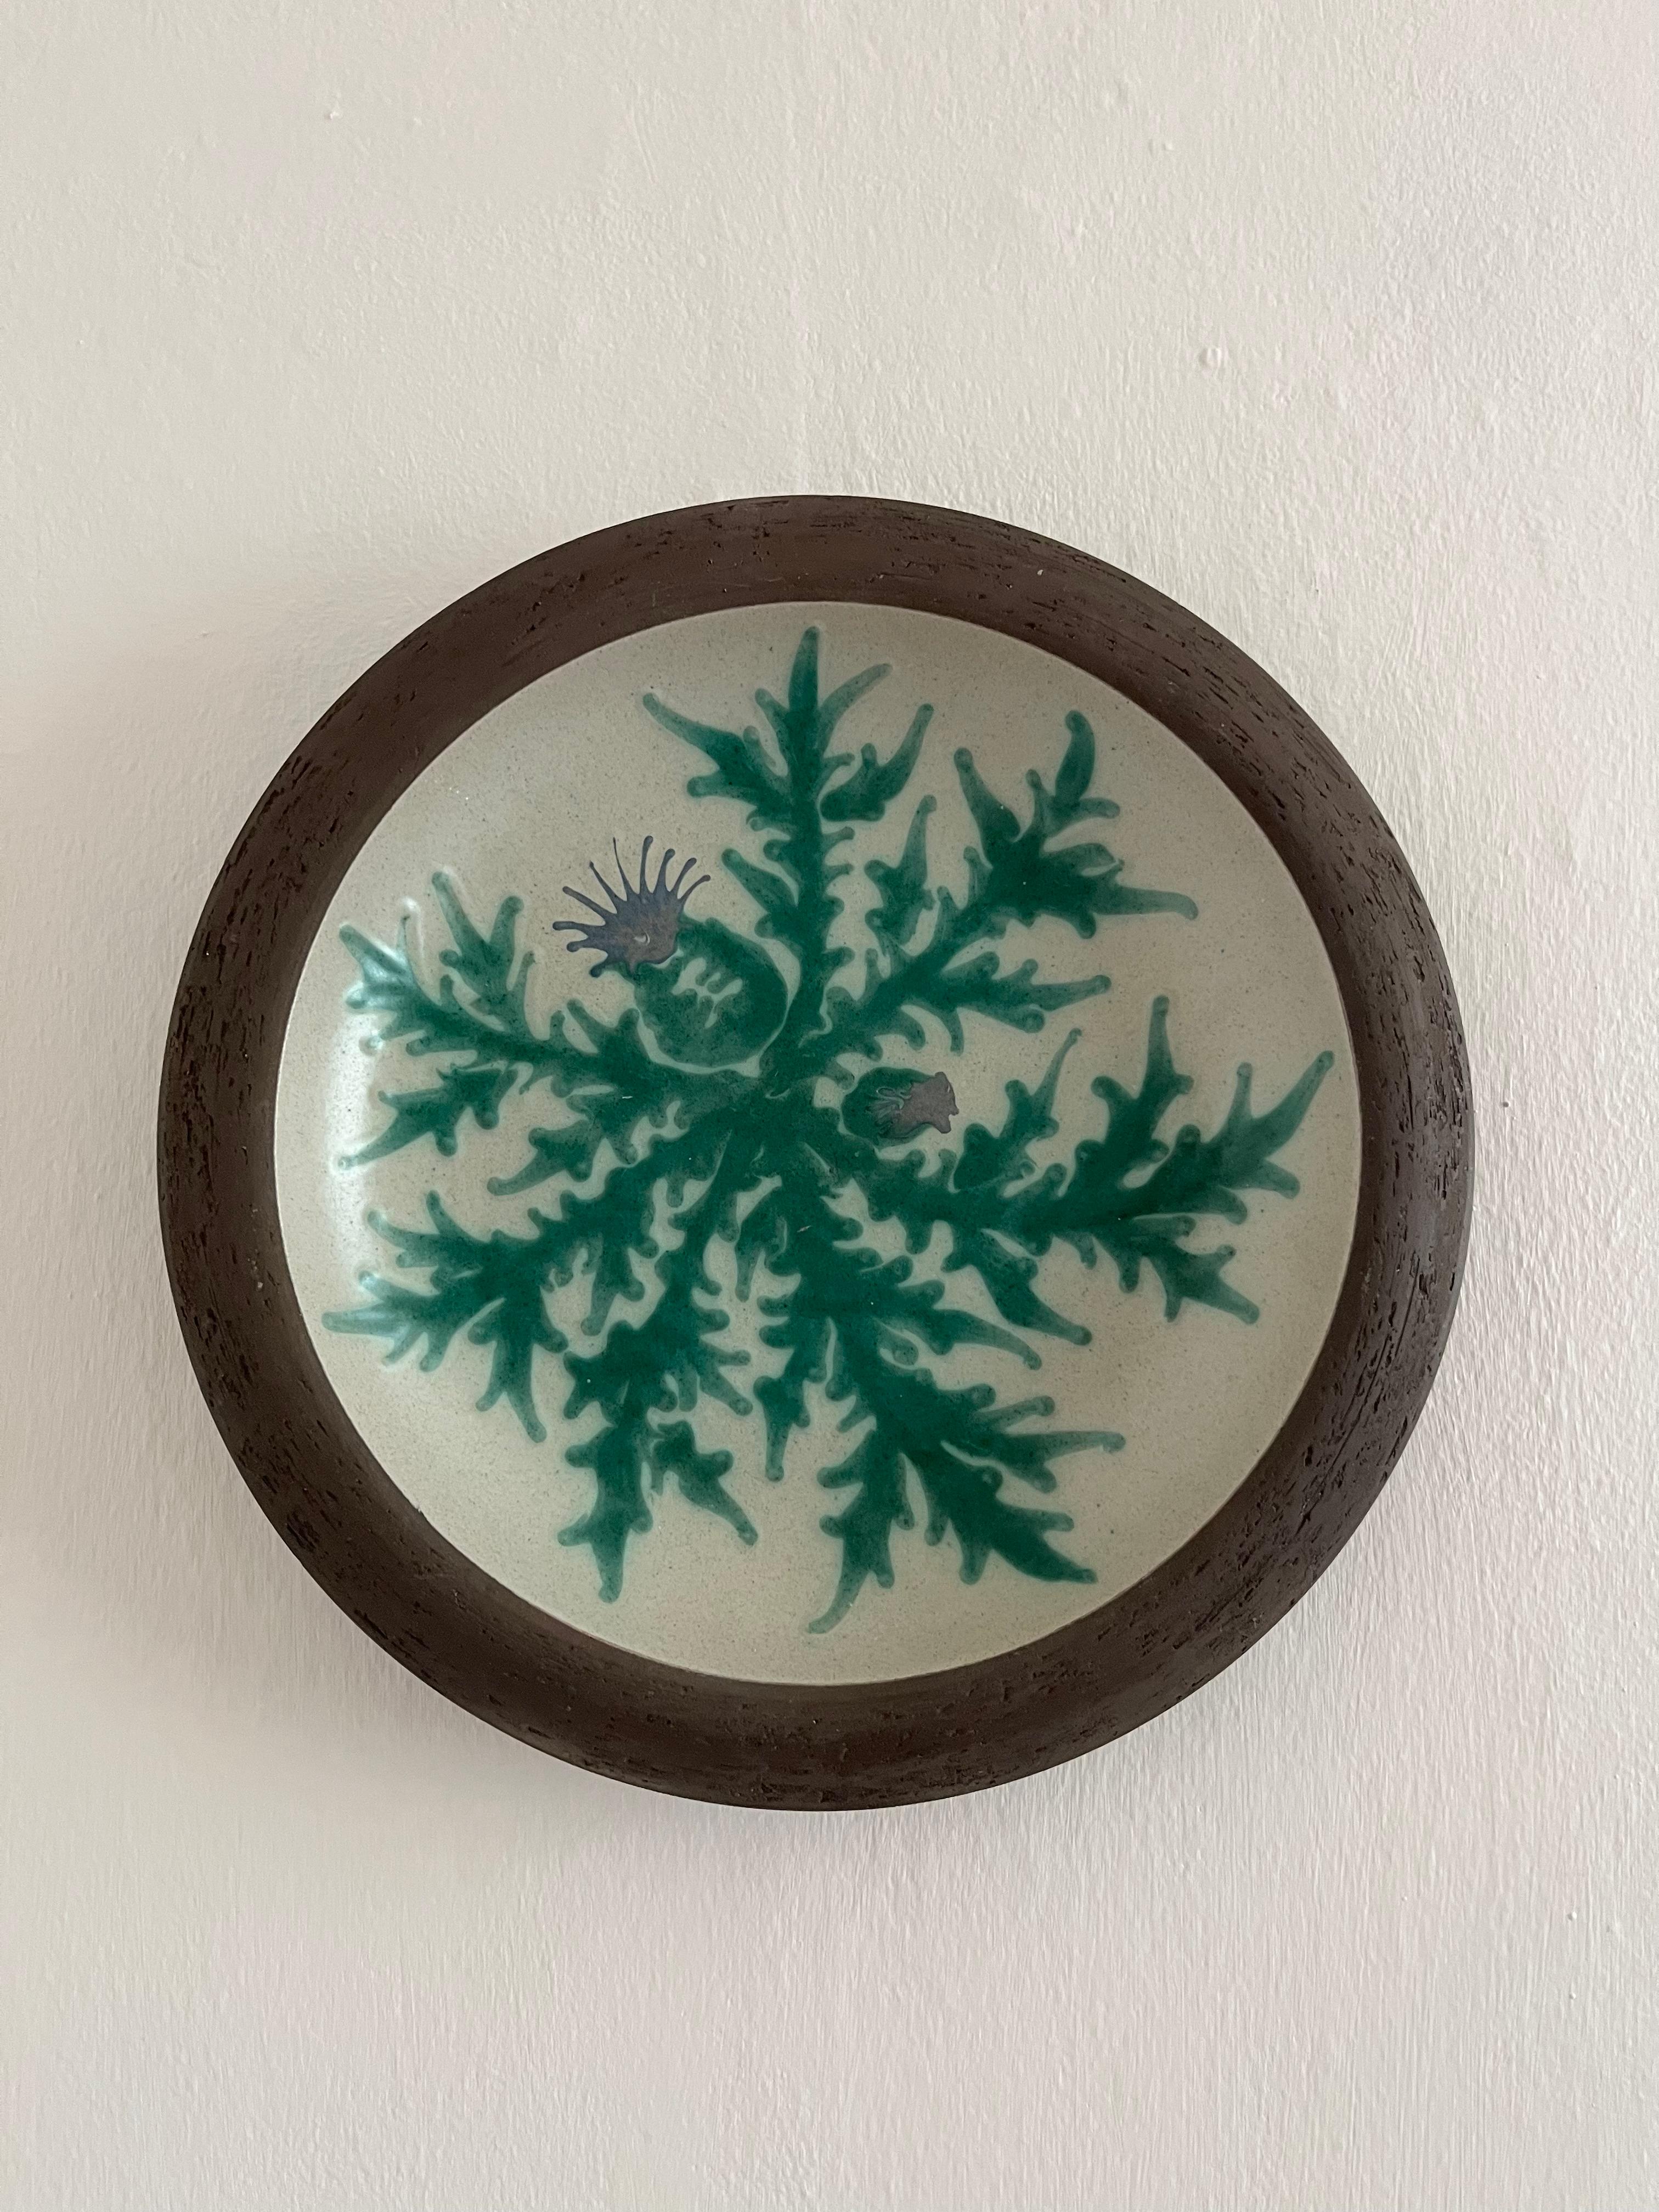 1970s earthenware wall decoration with thistle decorations. Earthenware wall decoration / dish with glazed front with thistle decorations and a matte backside signed by the ceramicist from Danish Pottemagerværkstedet Sjællands Odde.

Diameter: 29,5